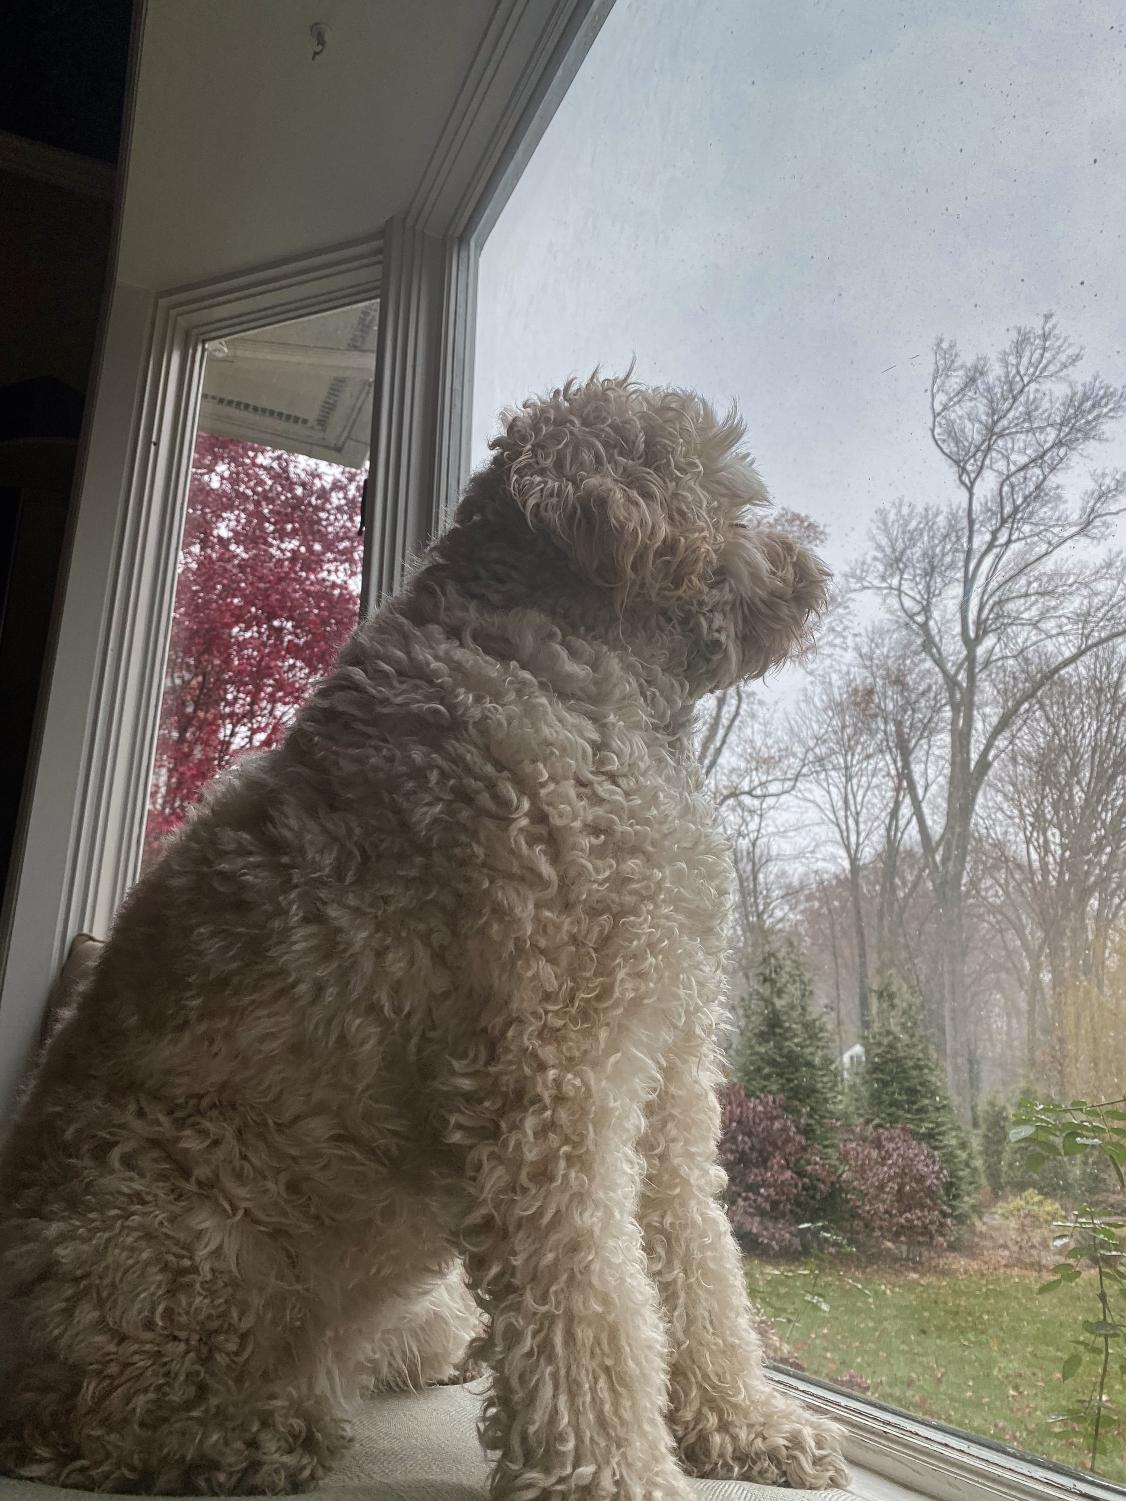 Dog looking out the window while sitting